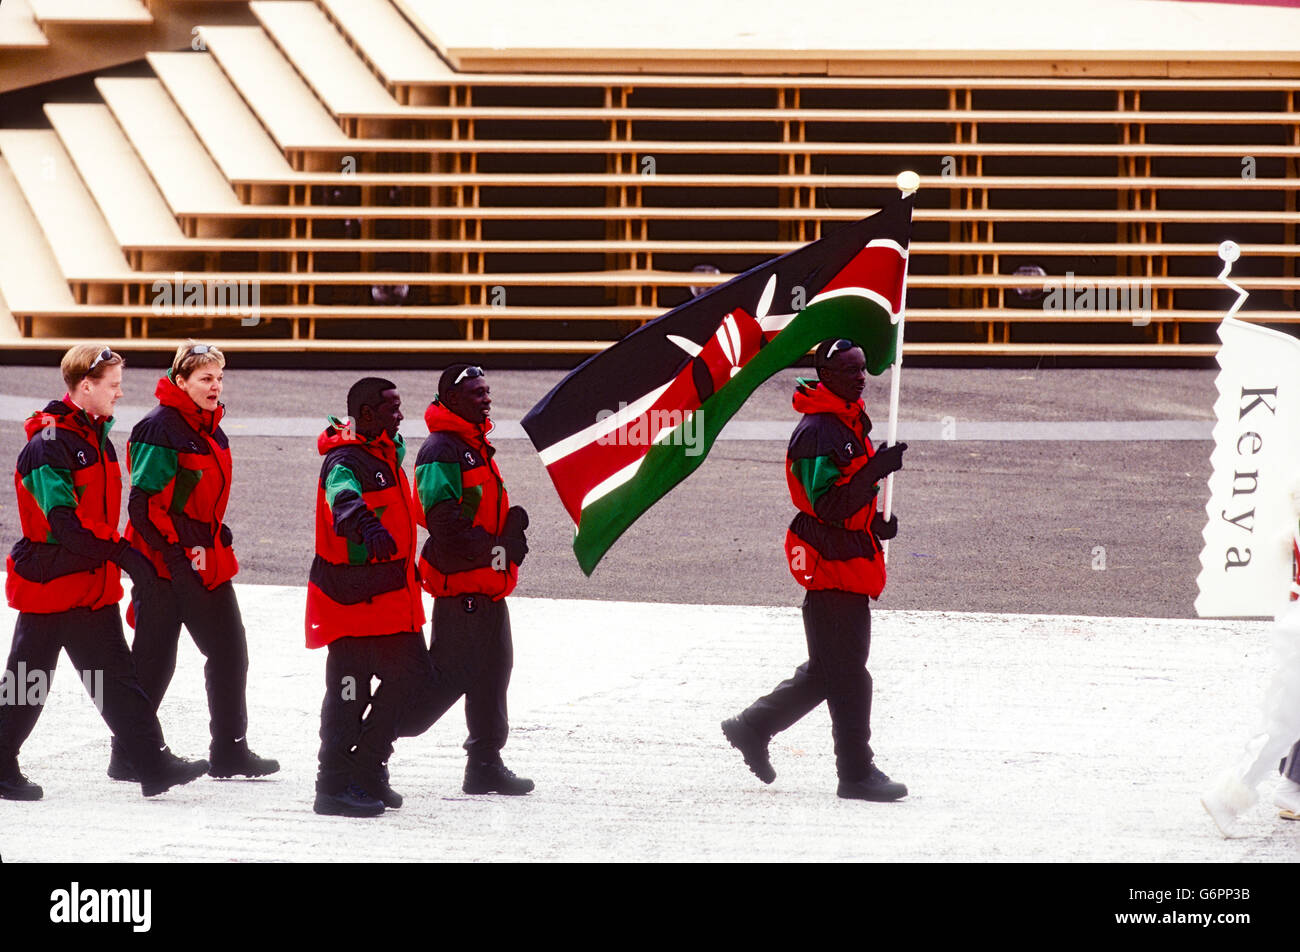 Team Kenya marching in the Opening ceremonies at the 1998 Olympic Winter Games, Nagano, Japan Stock Photo